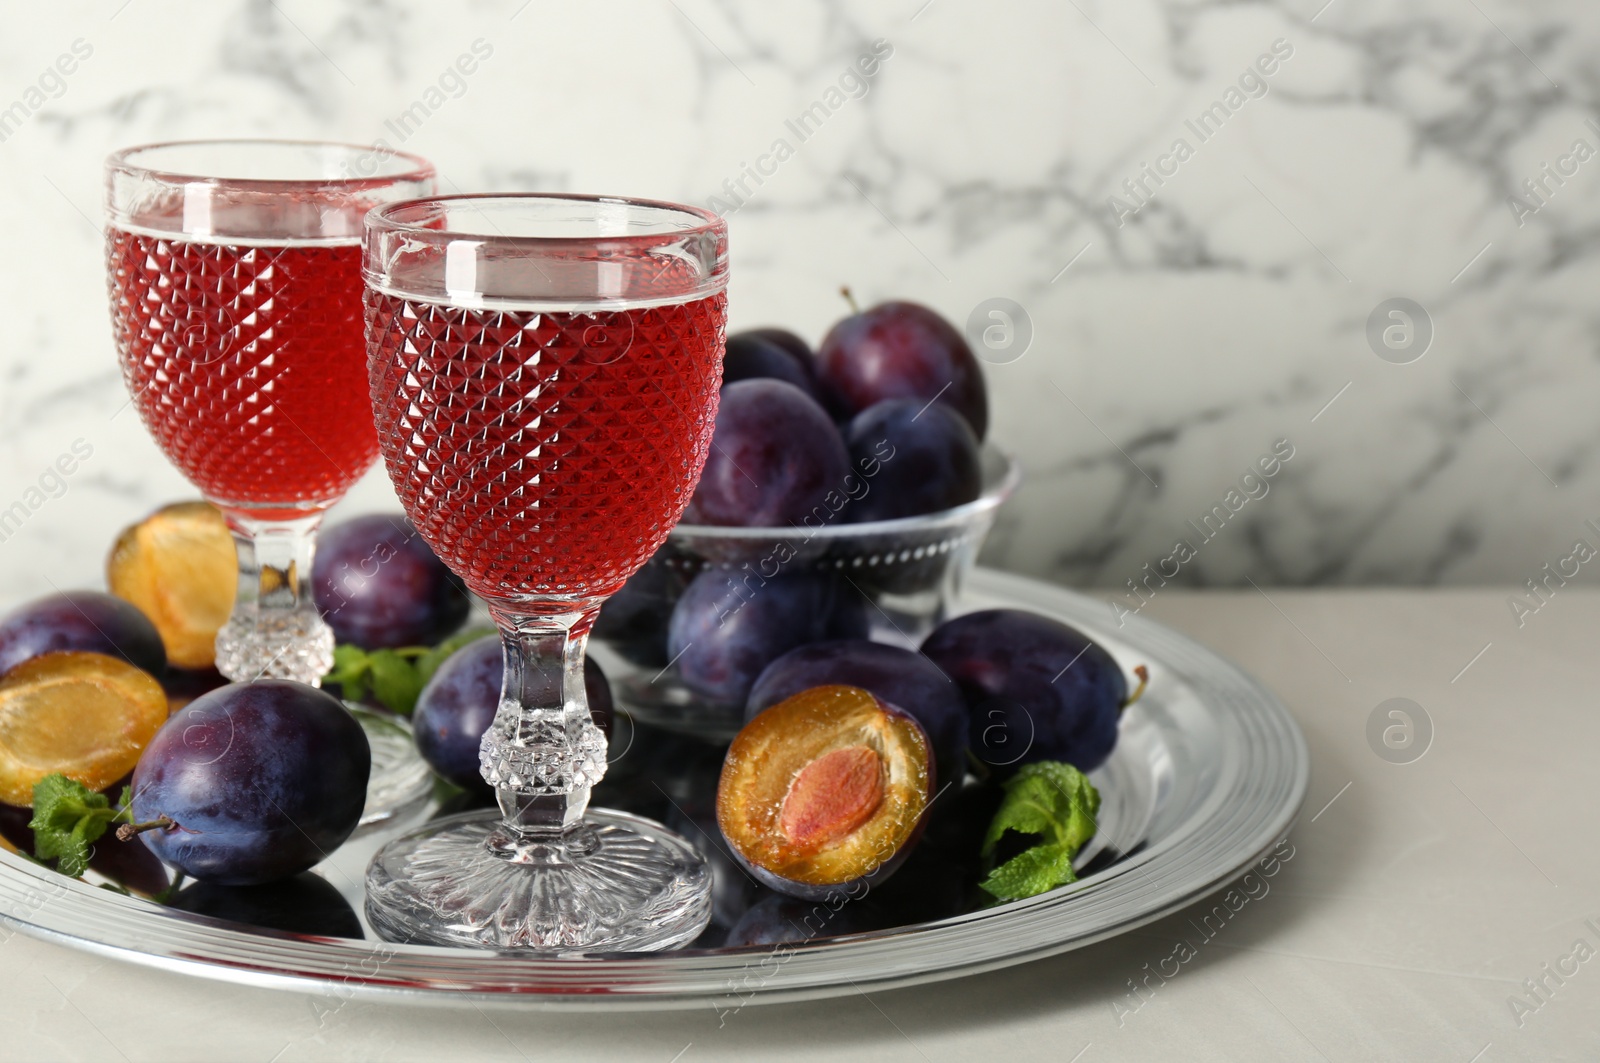 Photo of Delicious plum liquor, mint and ripe fruits on white table. Homemade strong alcoholic beverage